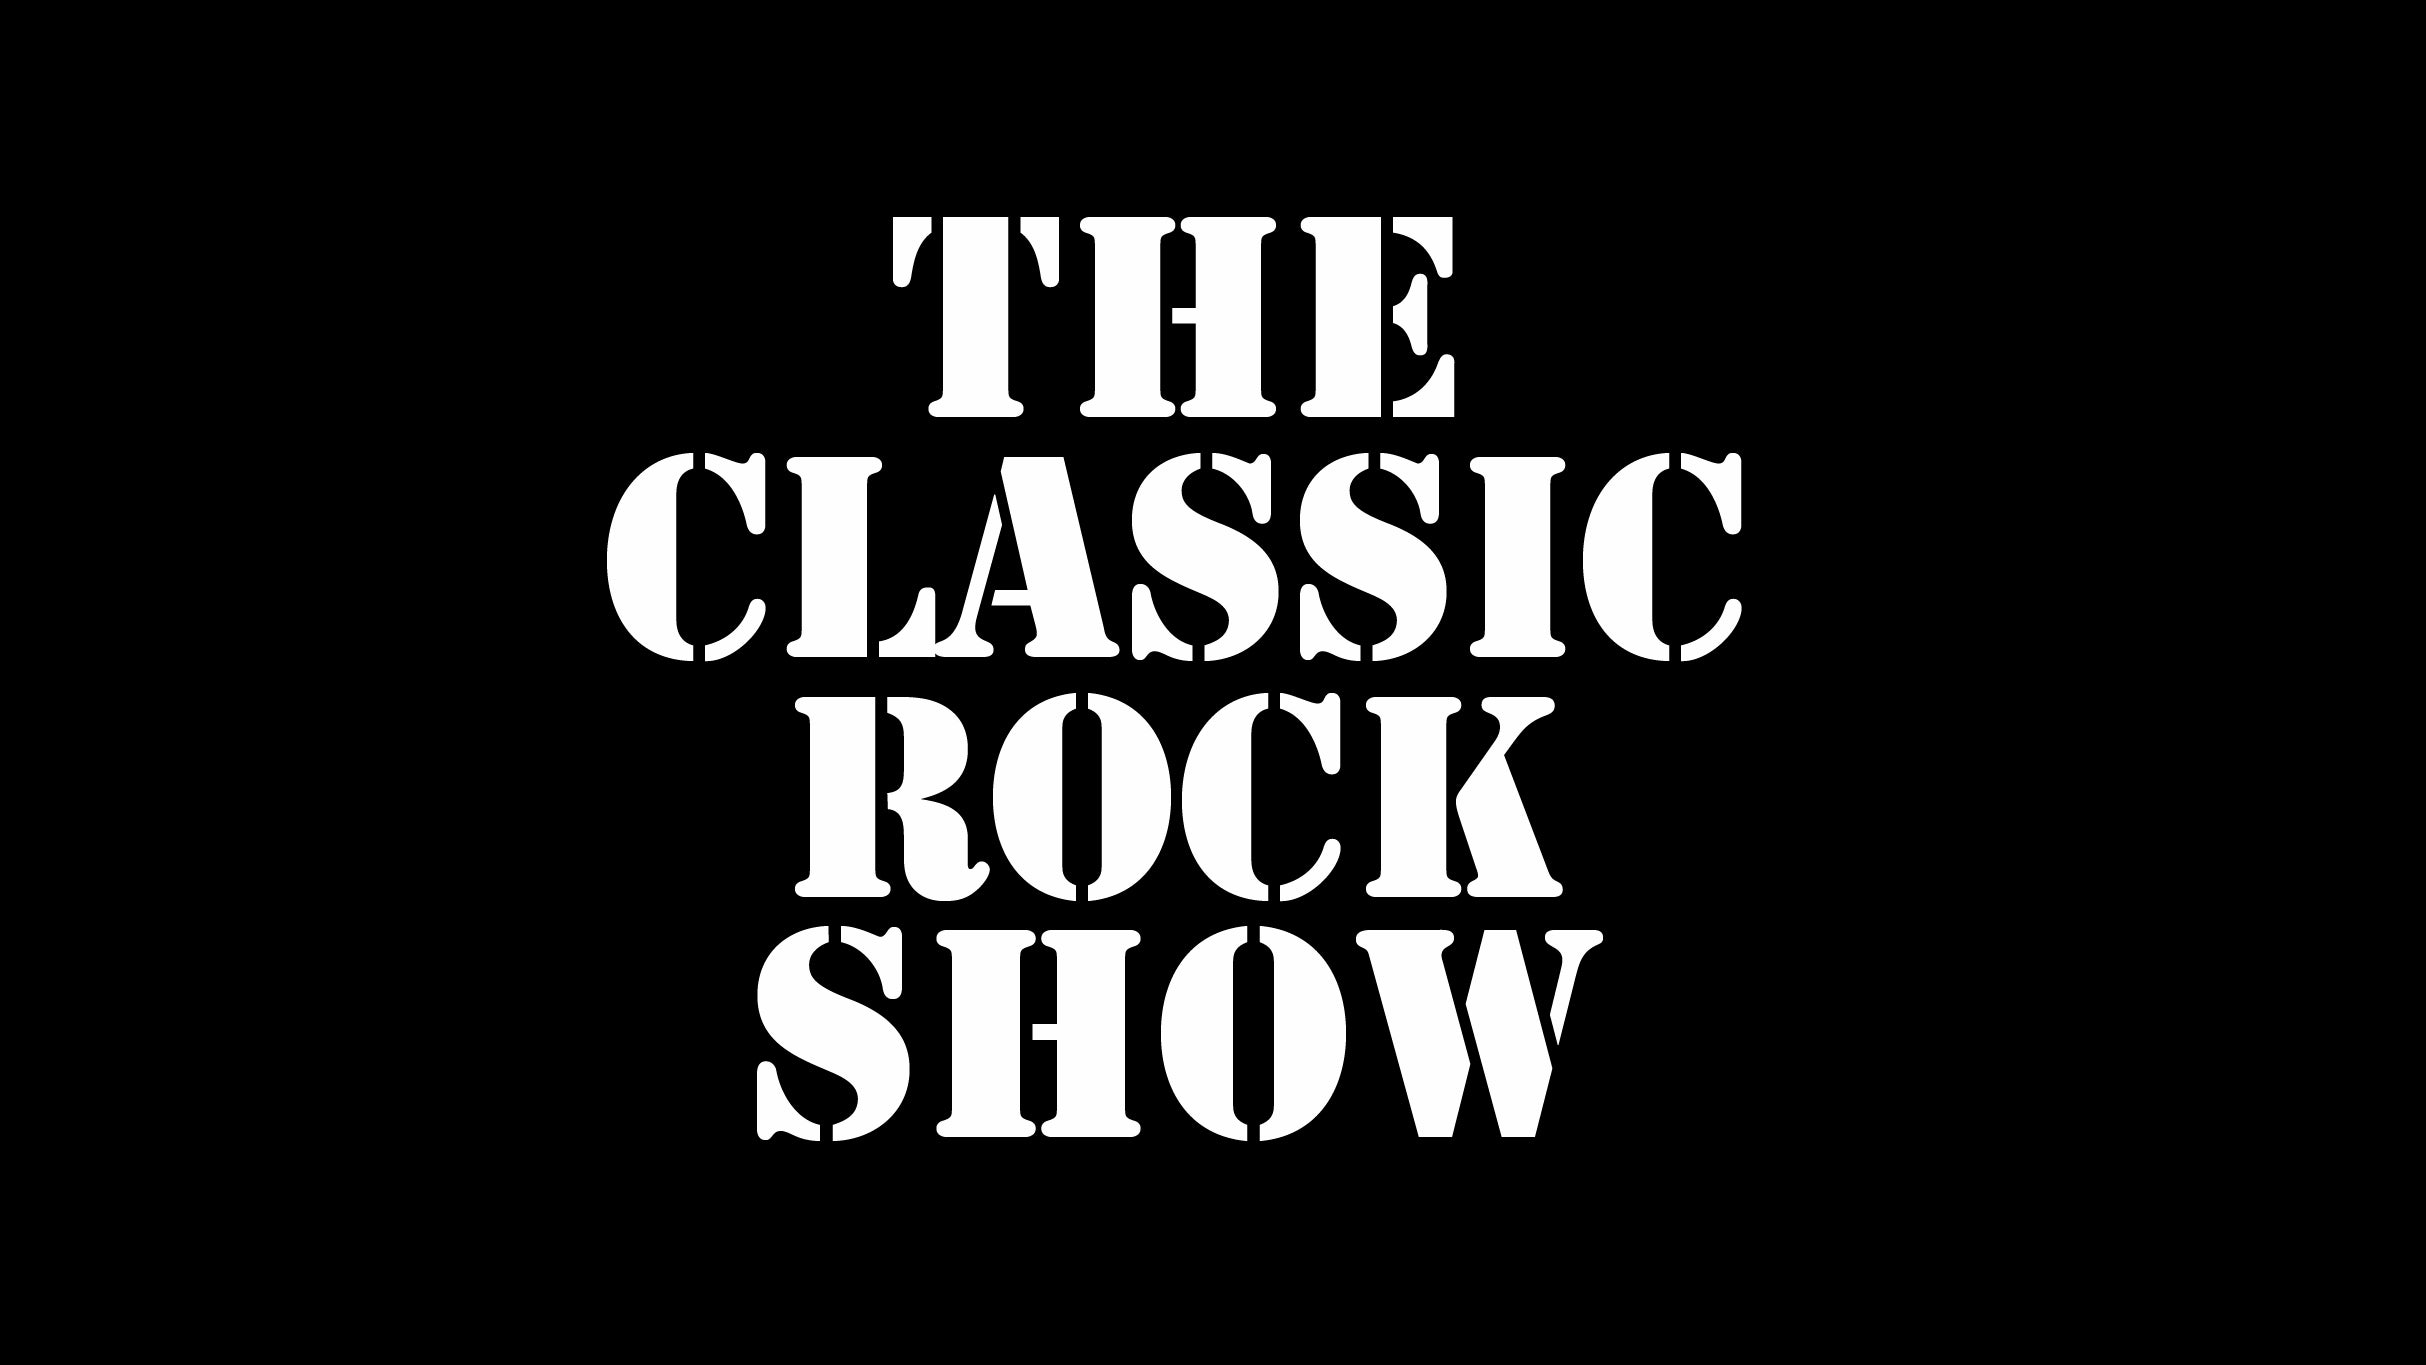 The Classic Rock Show at Hershey Theatre